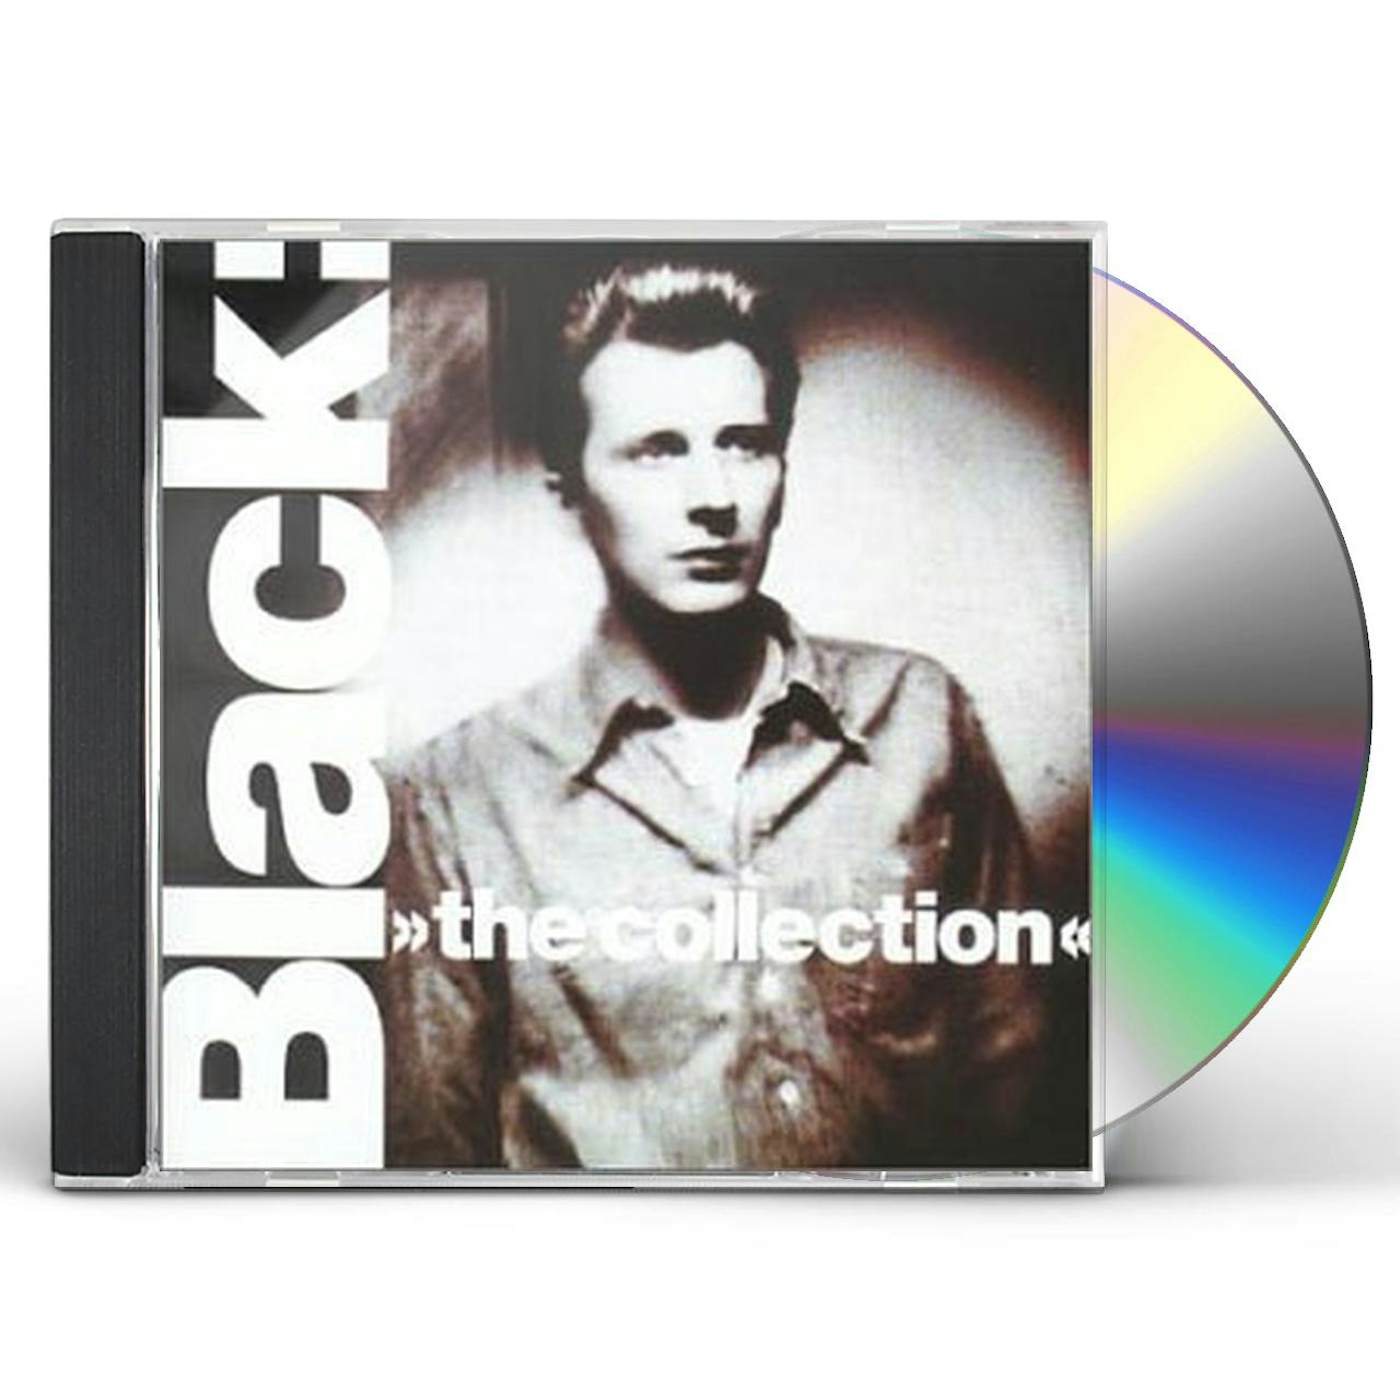 Black COLLECTION CD